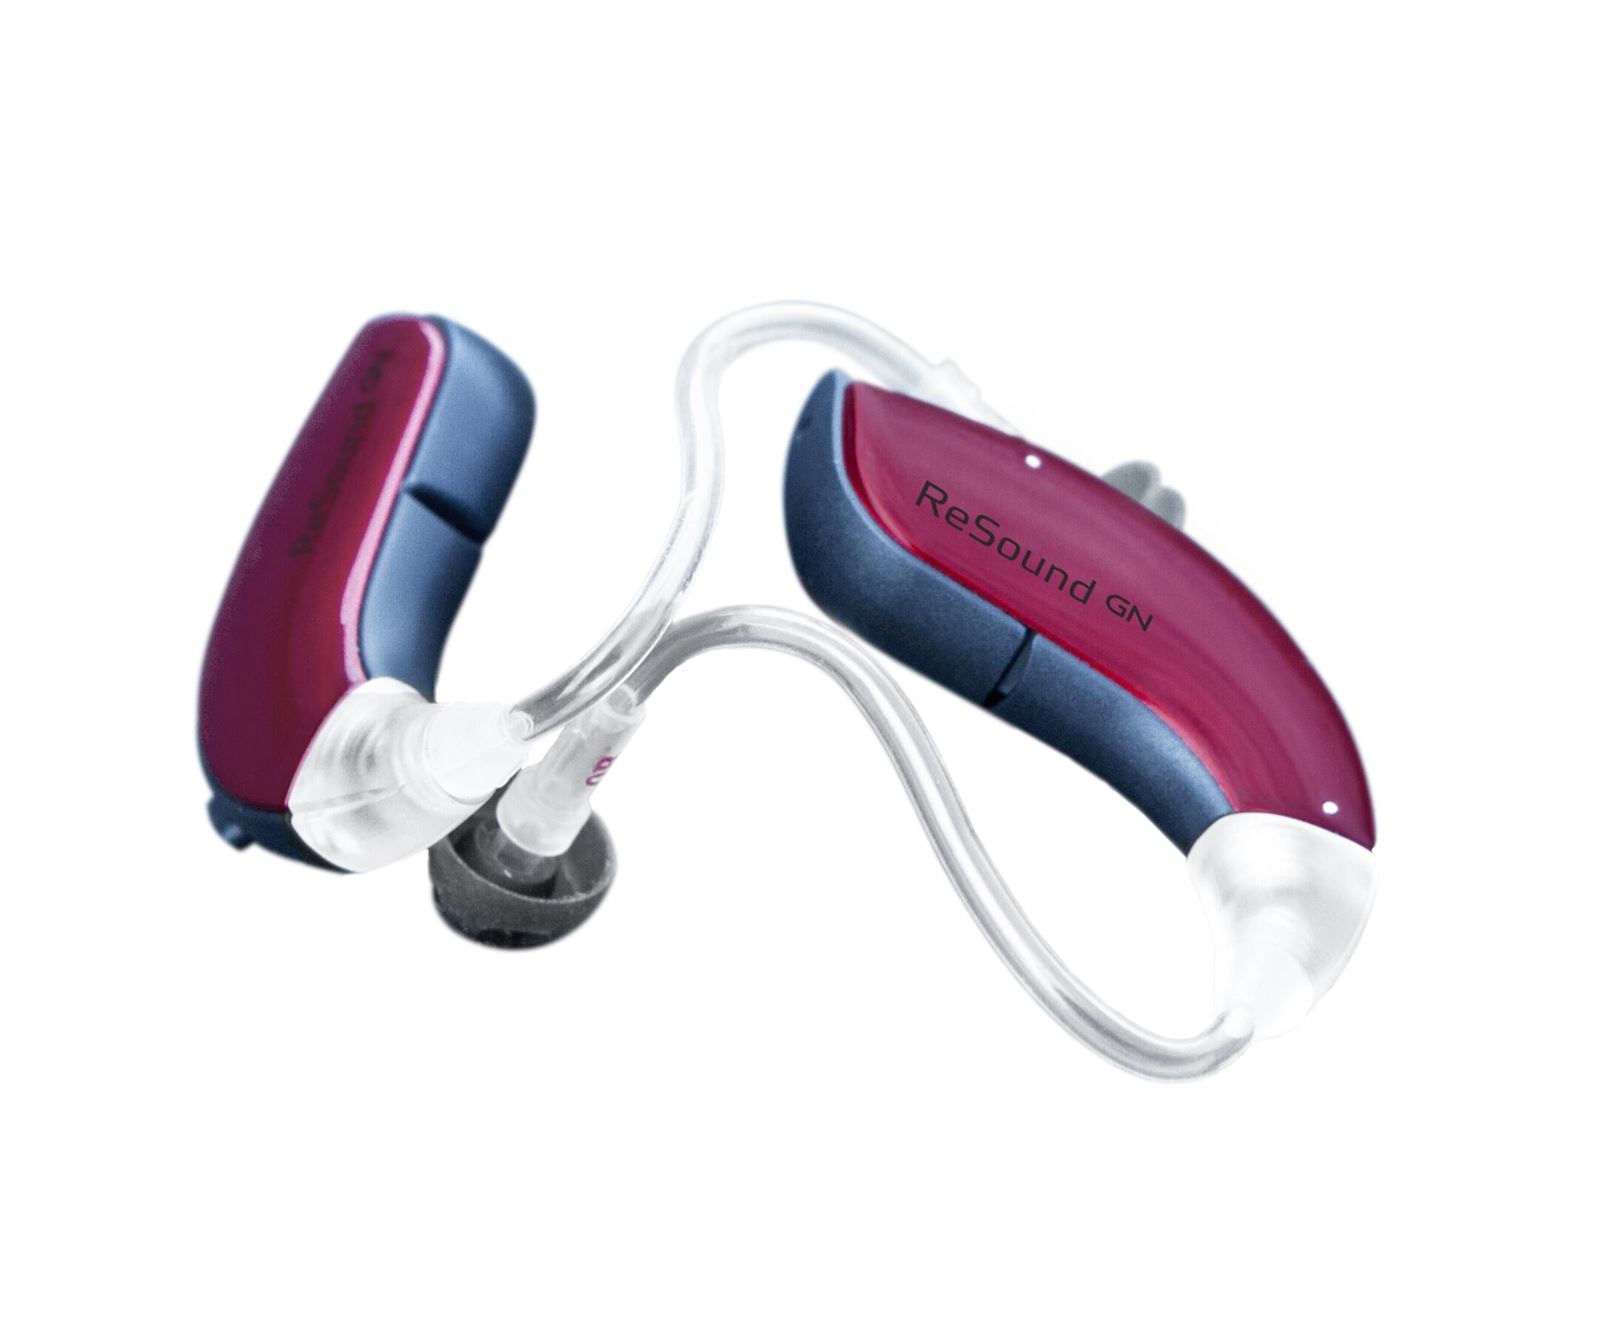 Let's use bold, beautiful hearing aids to celebrate deafness - Psyche Ideas